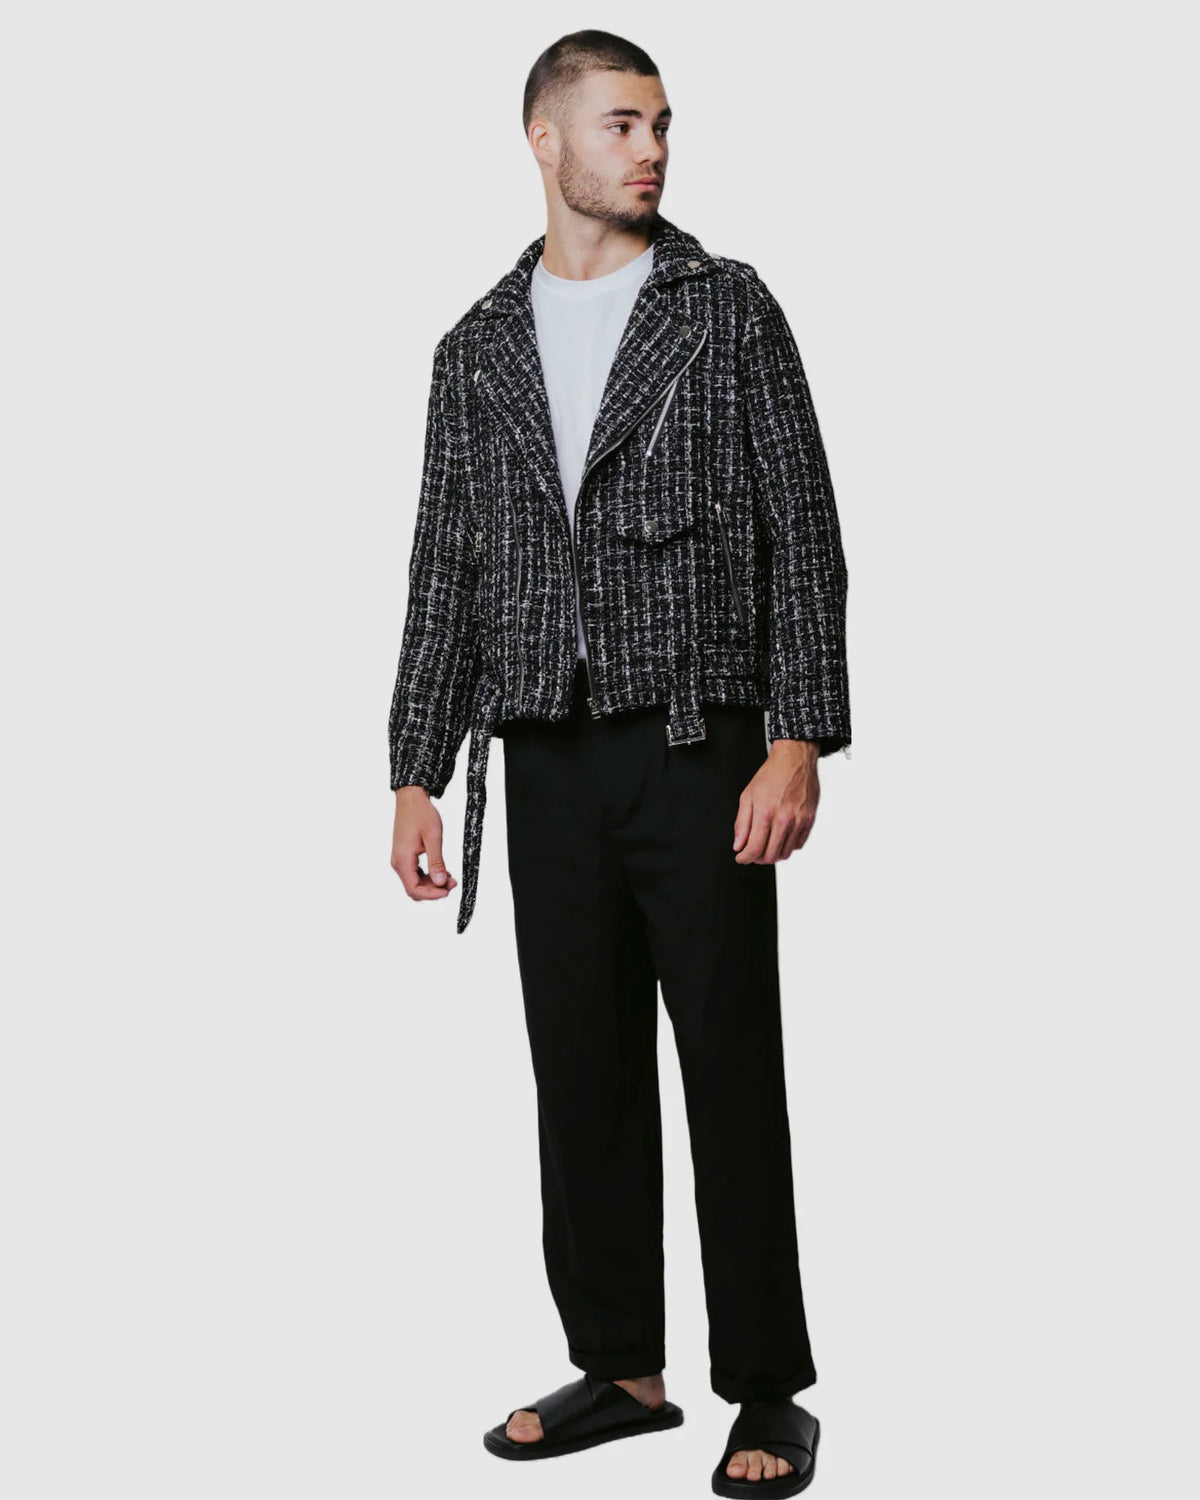 Justin Cassin Ginza Plaid Zip Jacket in Black/White Color 2